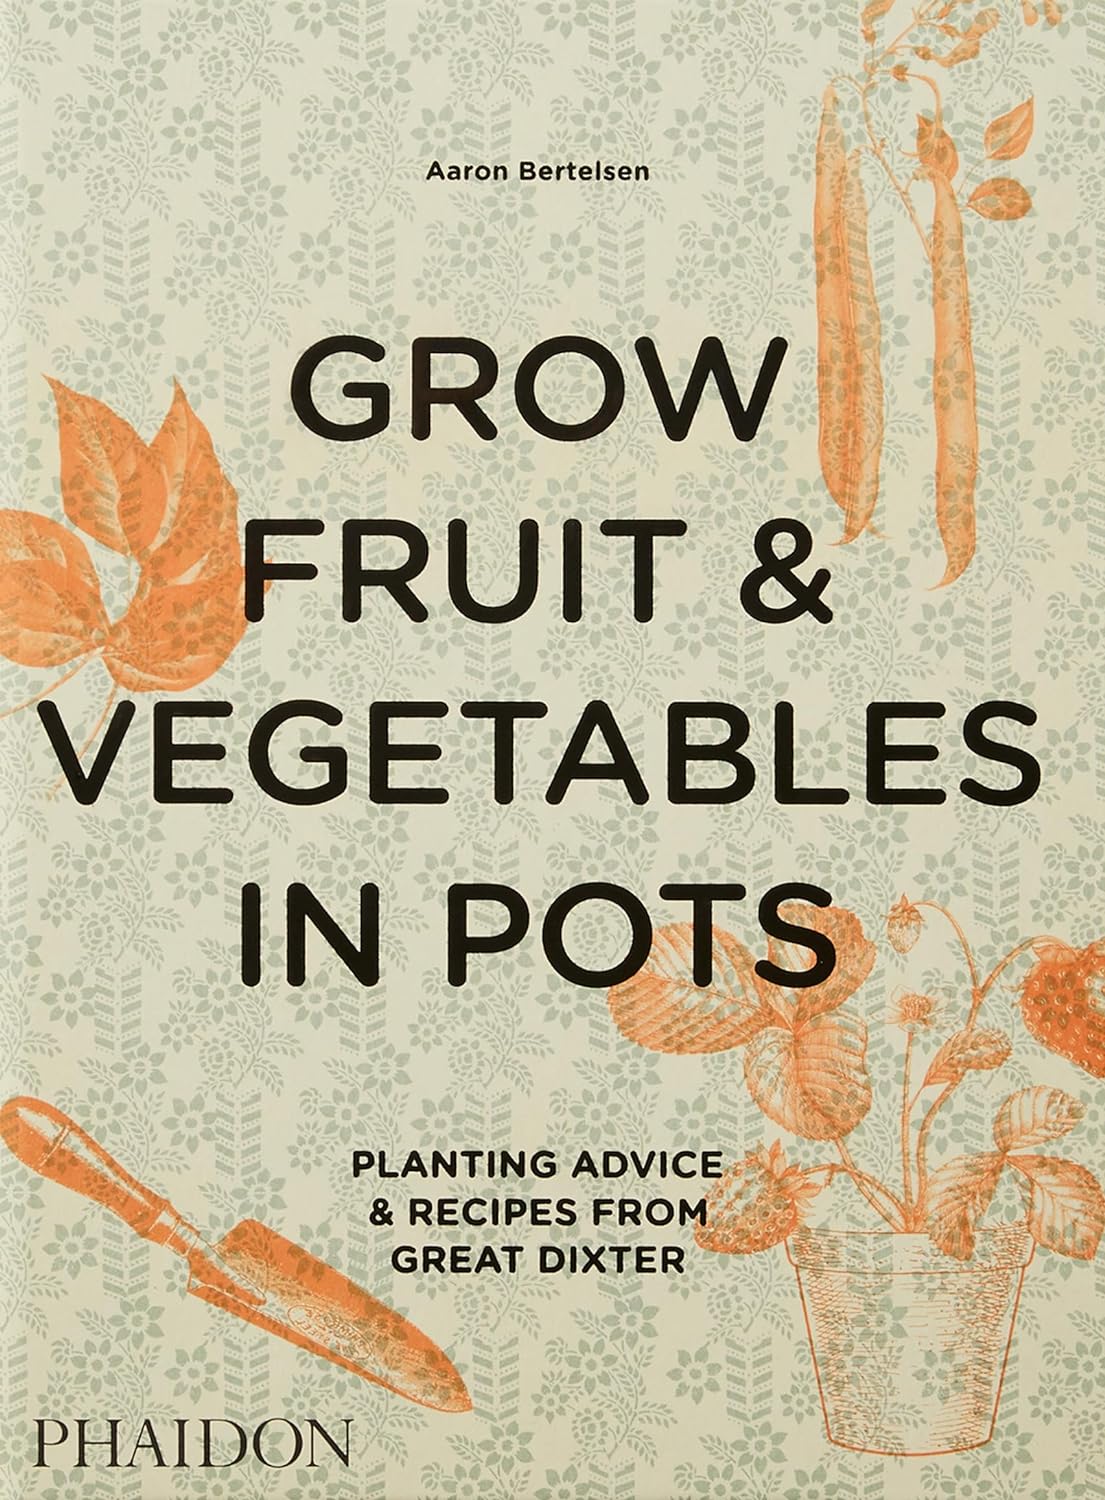 Grow Fruit and Vegetables in Pots: Planting Advice and Recipes from Great Dixter. Expert planting advice for growing fruit and vegetables in pots from the acclaimed English garden - with 50 delicious recipes.